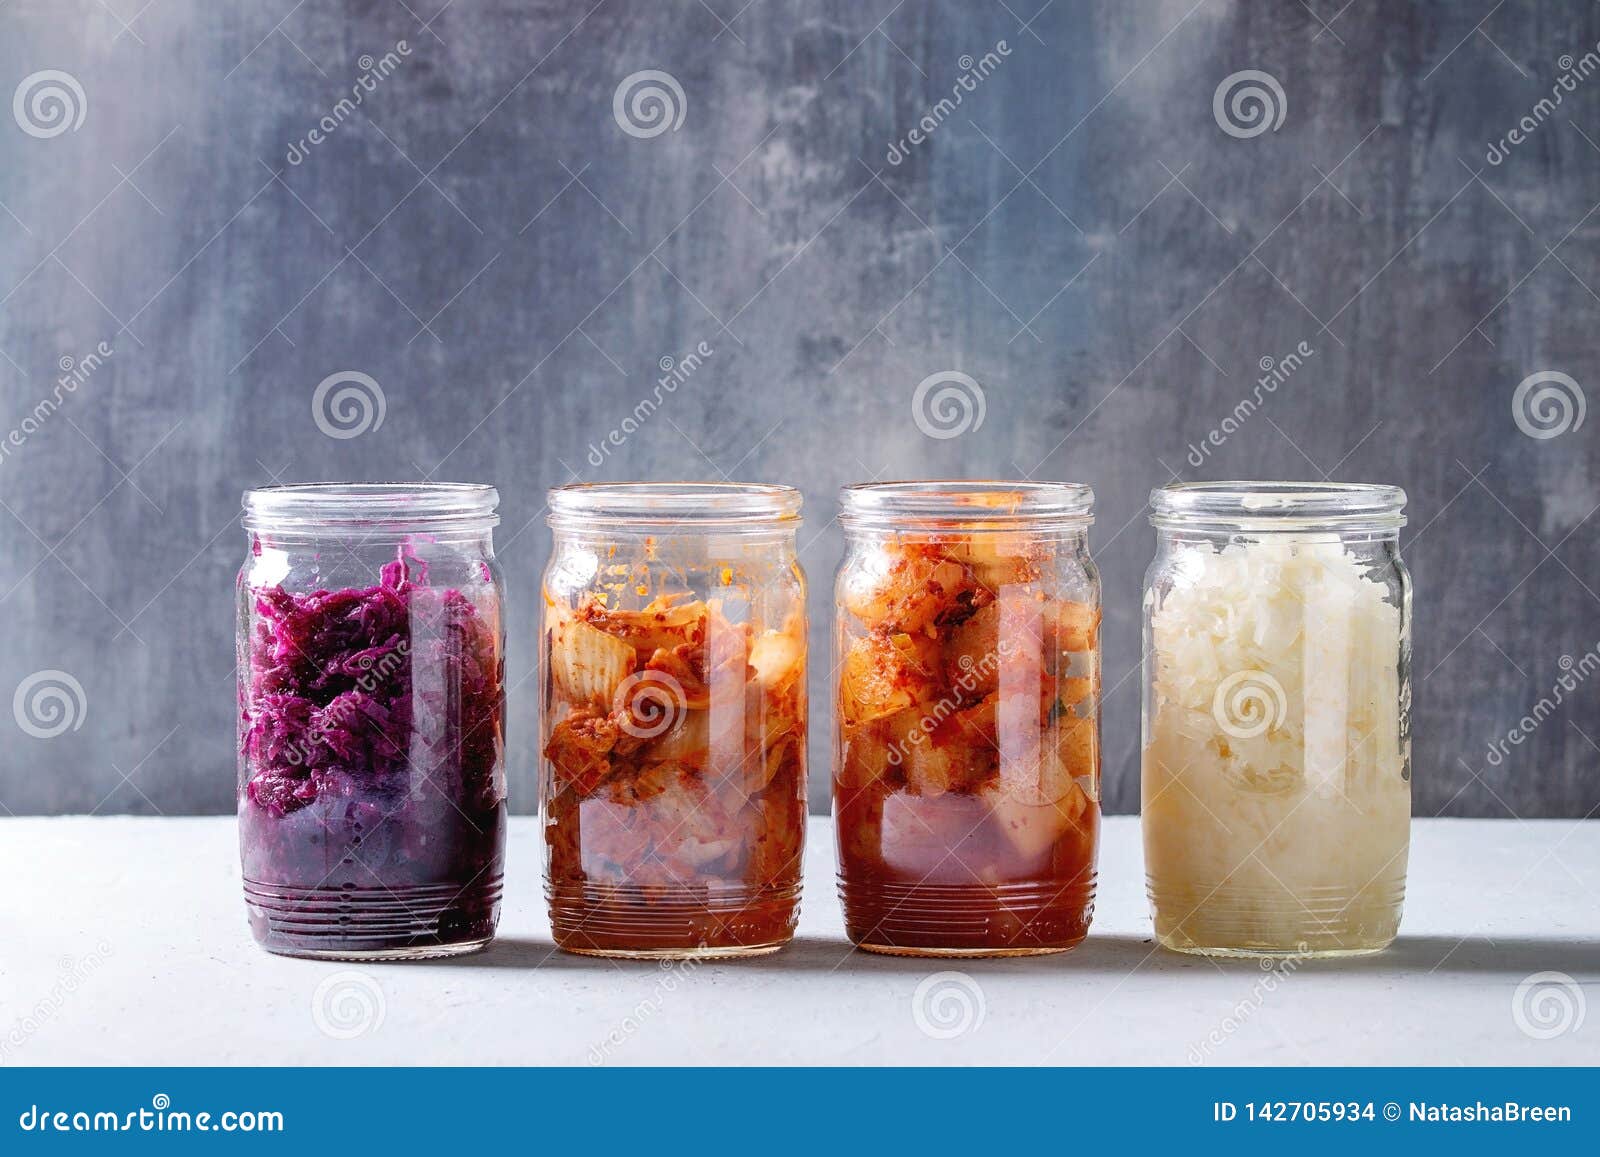 variety of fermented food